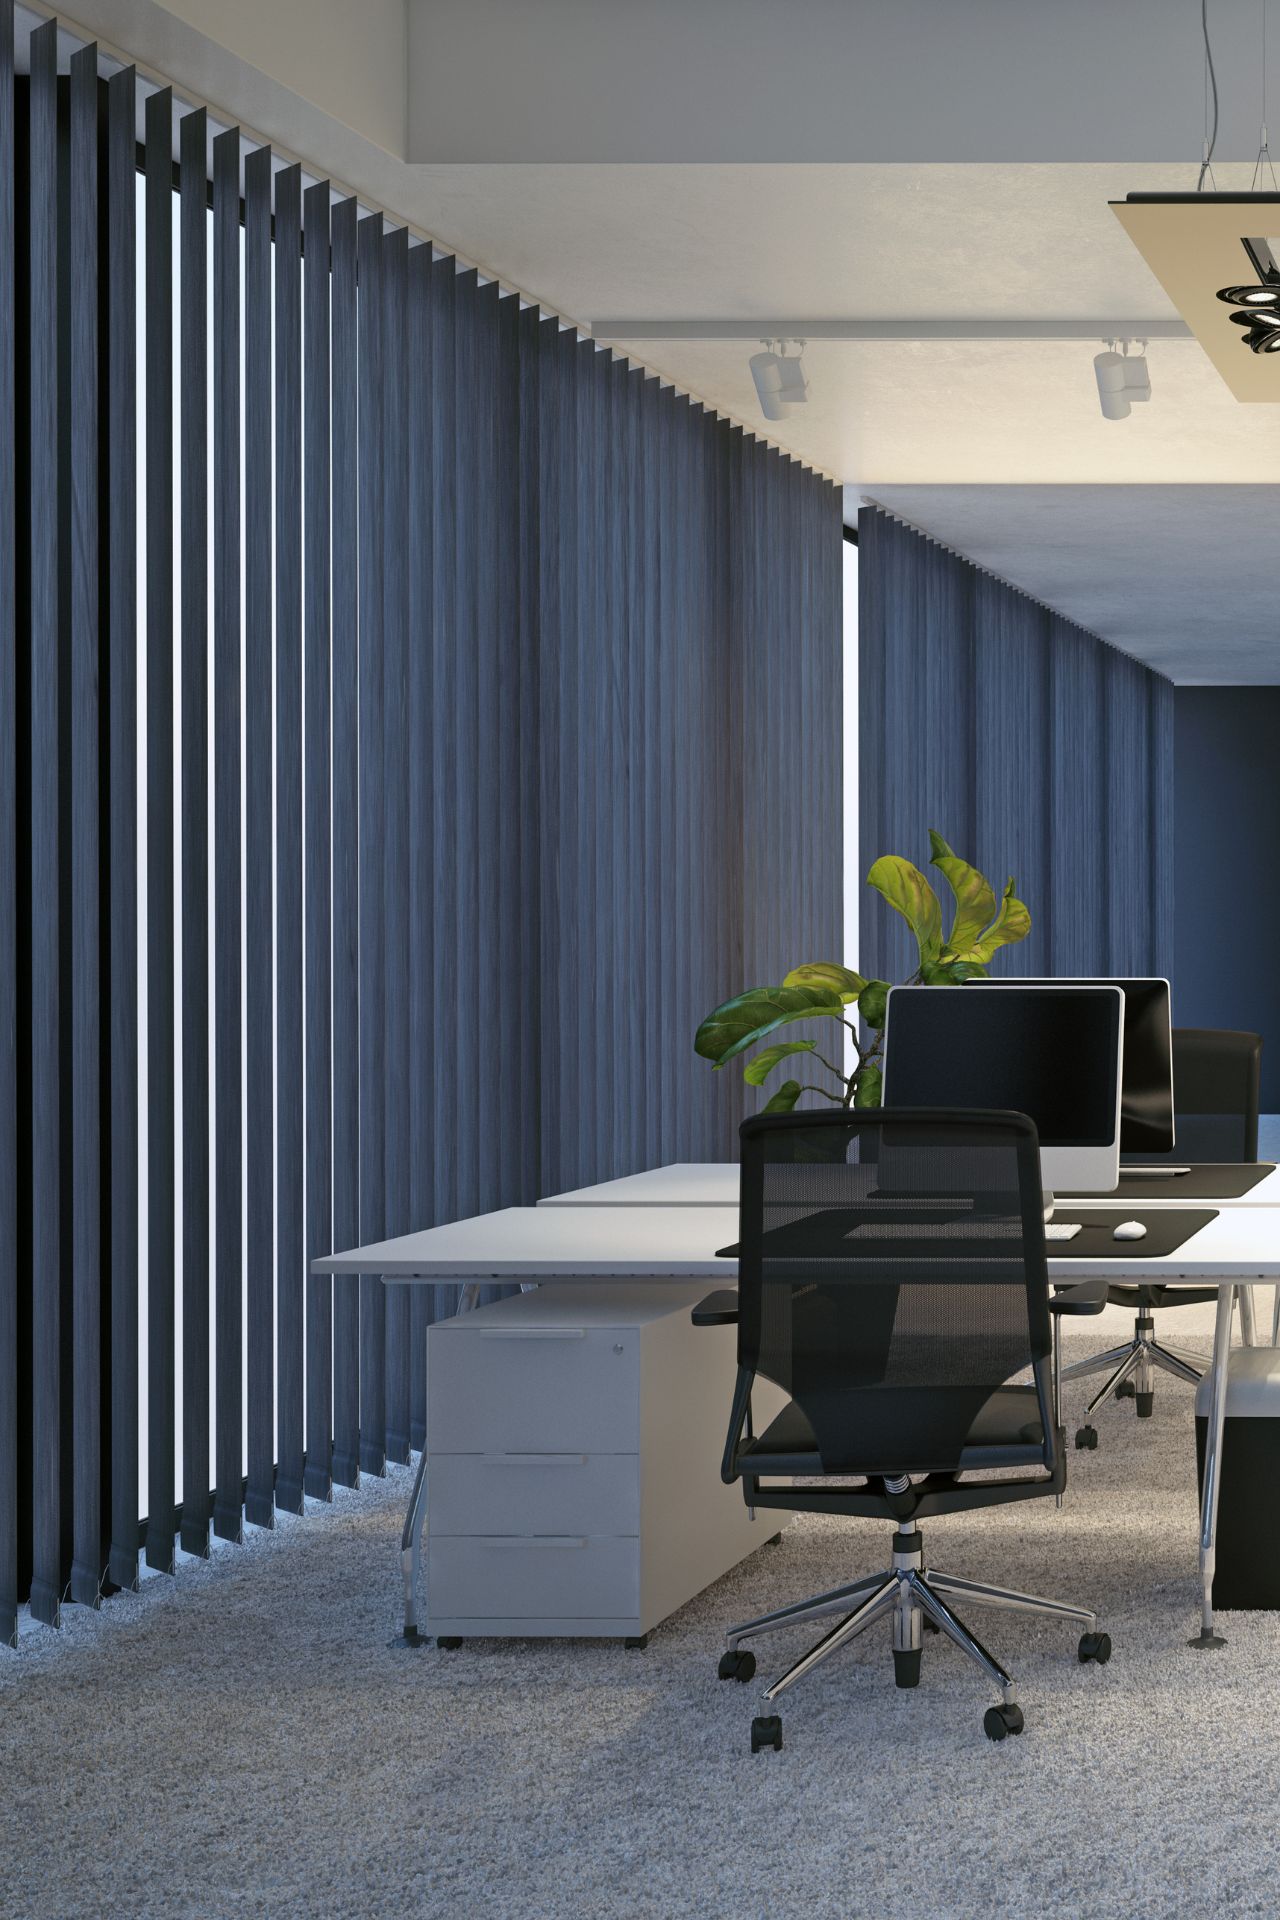 made to measure office blinds in dubai